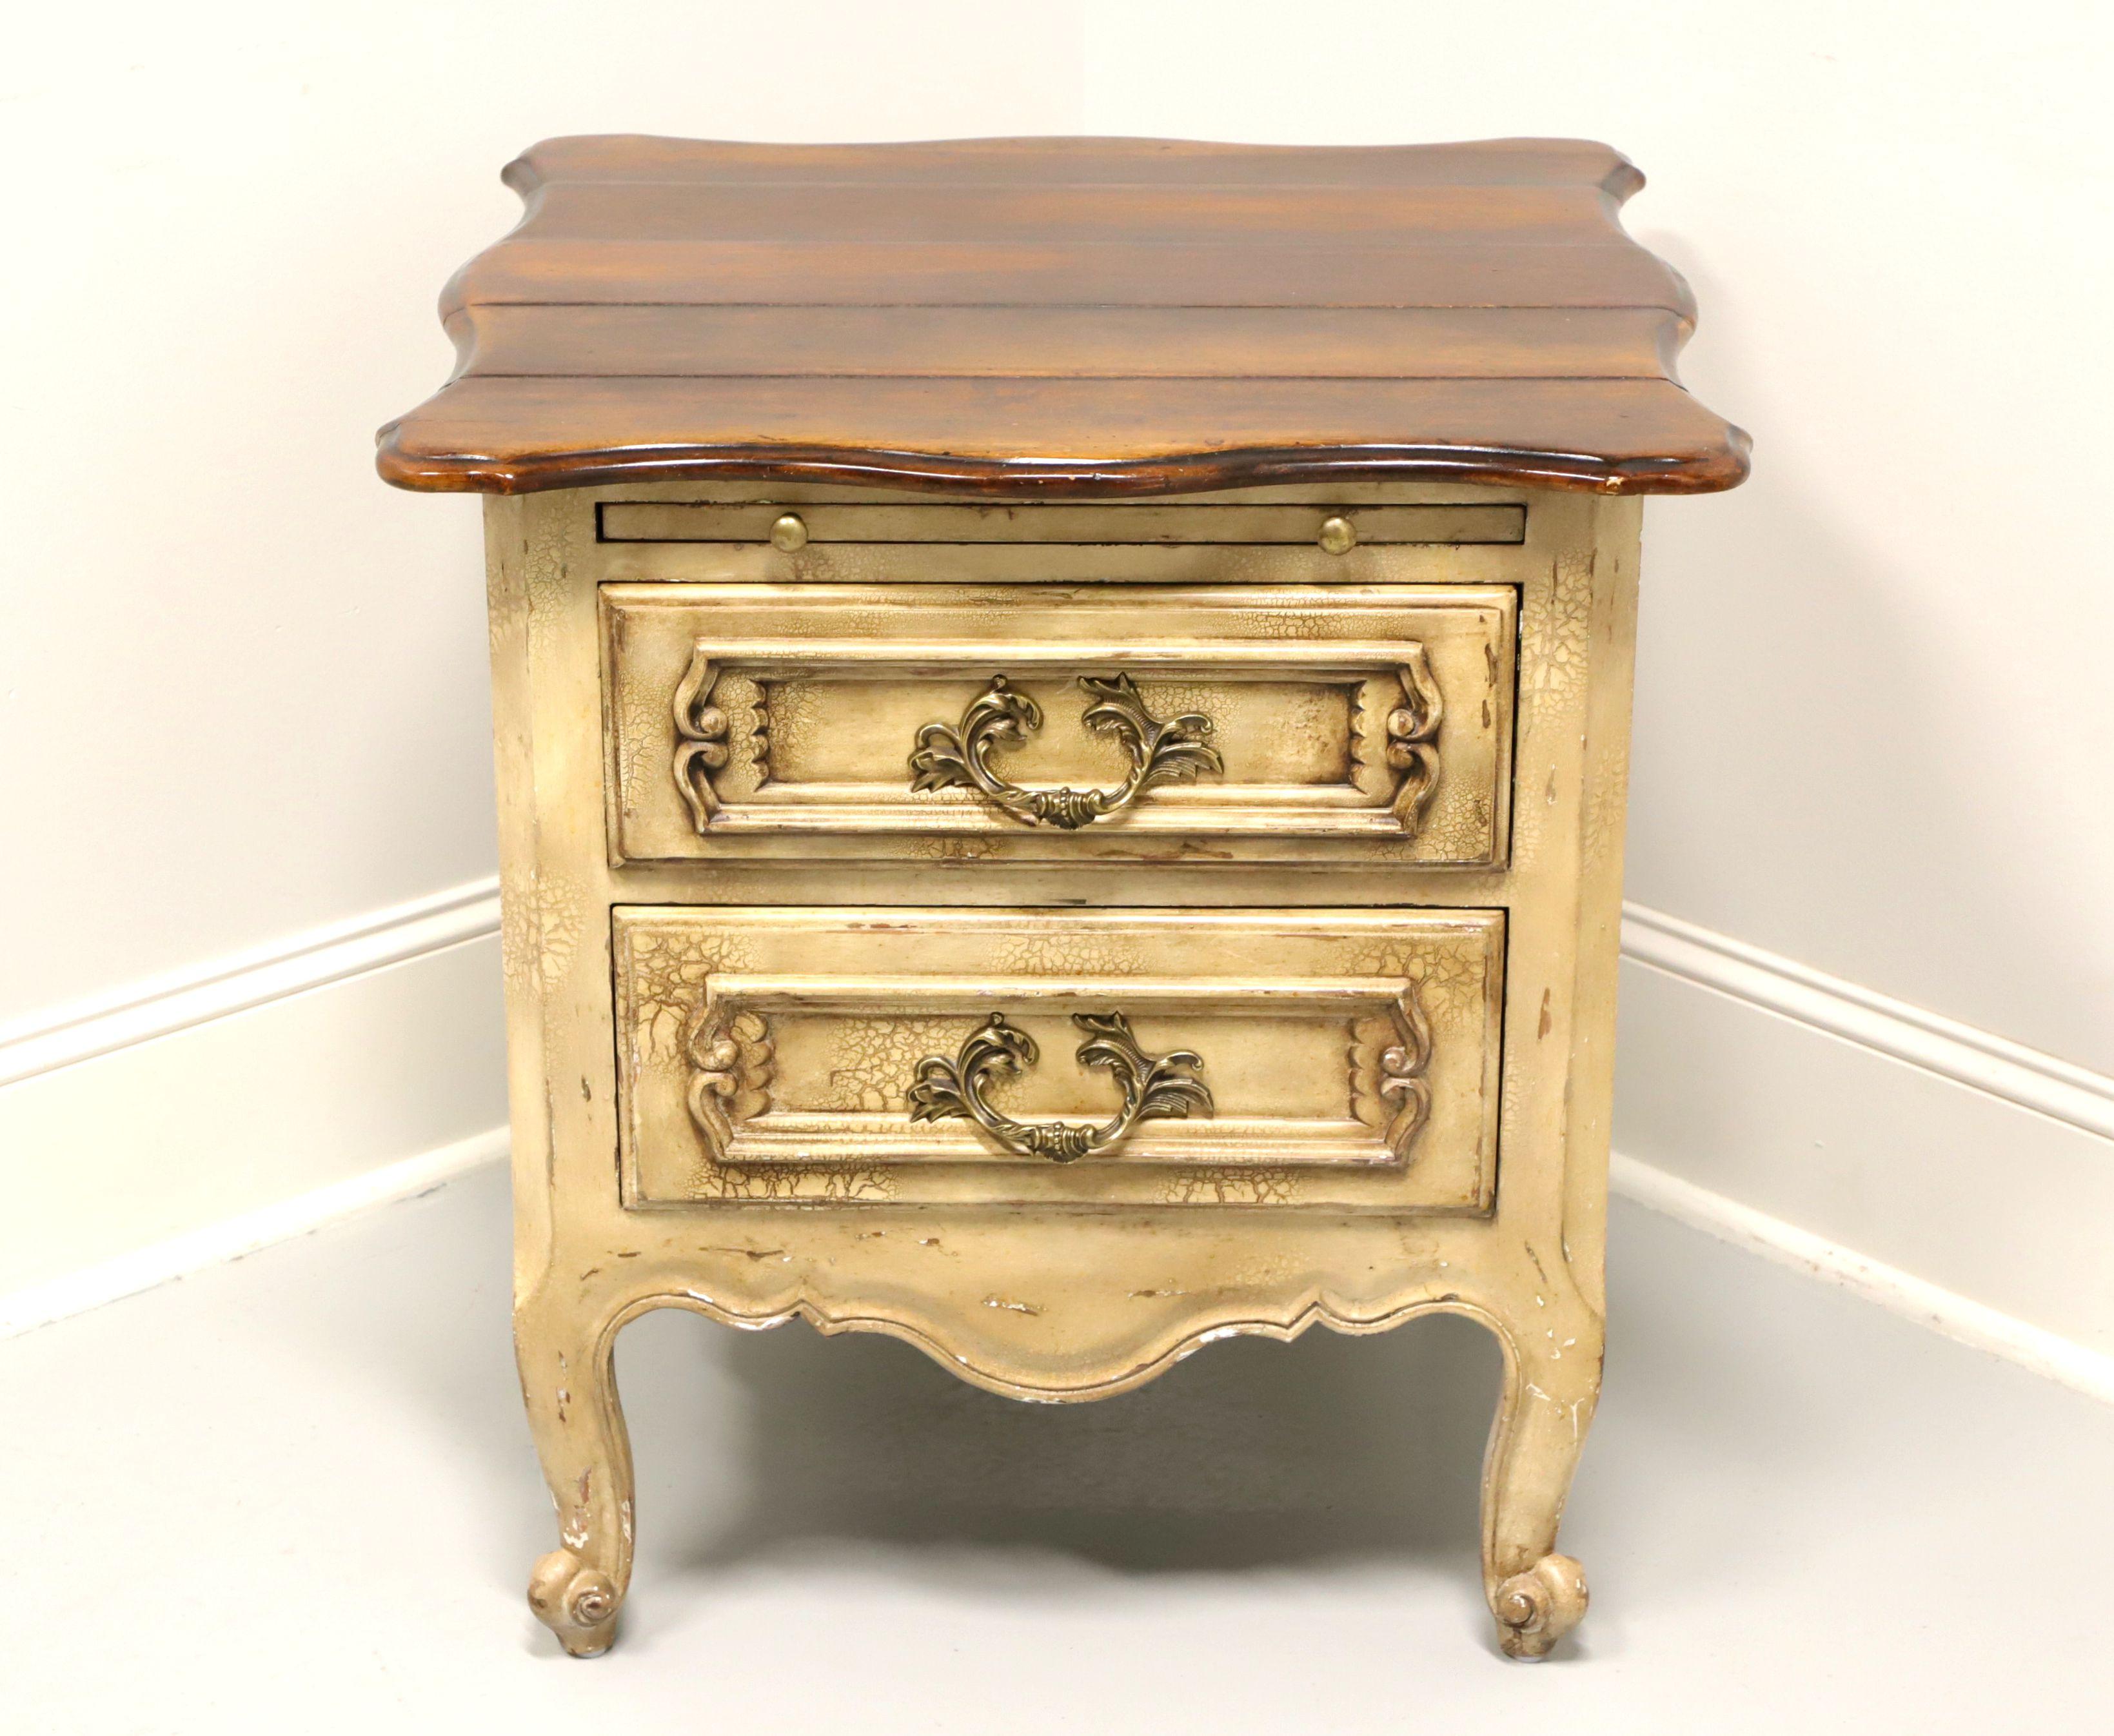 A French Country style nightstand, unbranded. Hardwood painted antique white with a distressed finish to give the appearance of age, dark stained plank style curved top, brass hardware, carved apron & drawer fronts, curved legs and scroll feet.